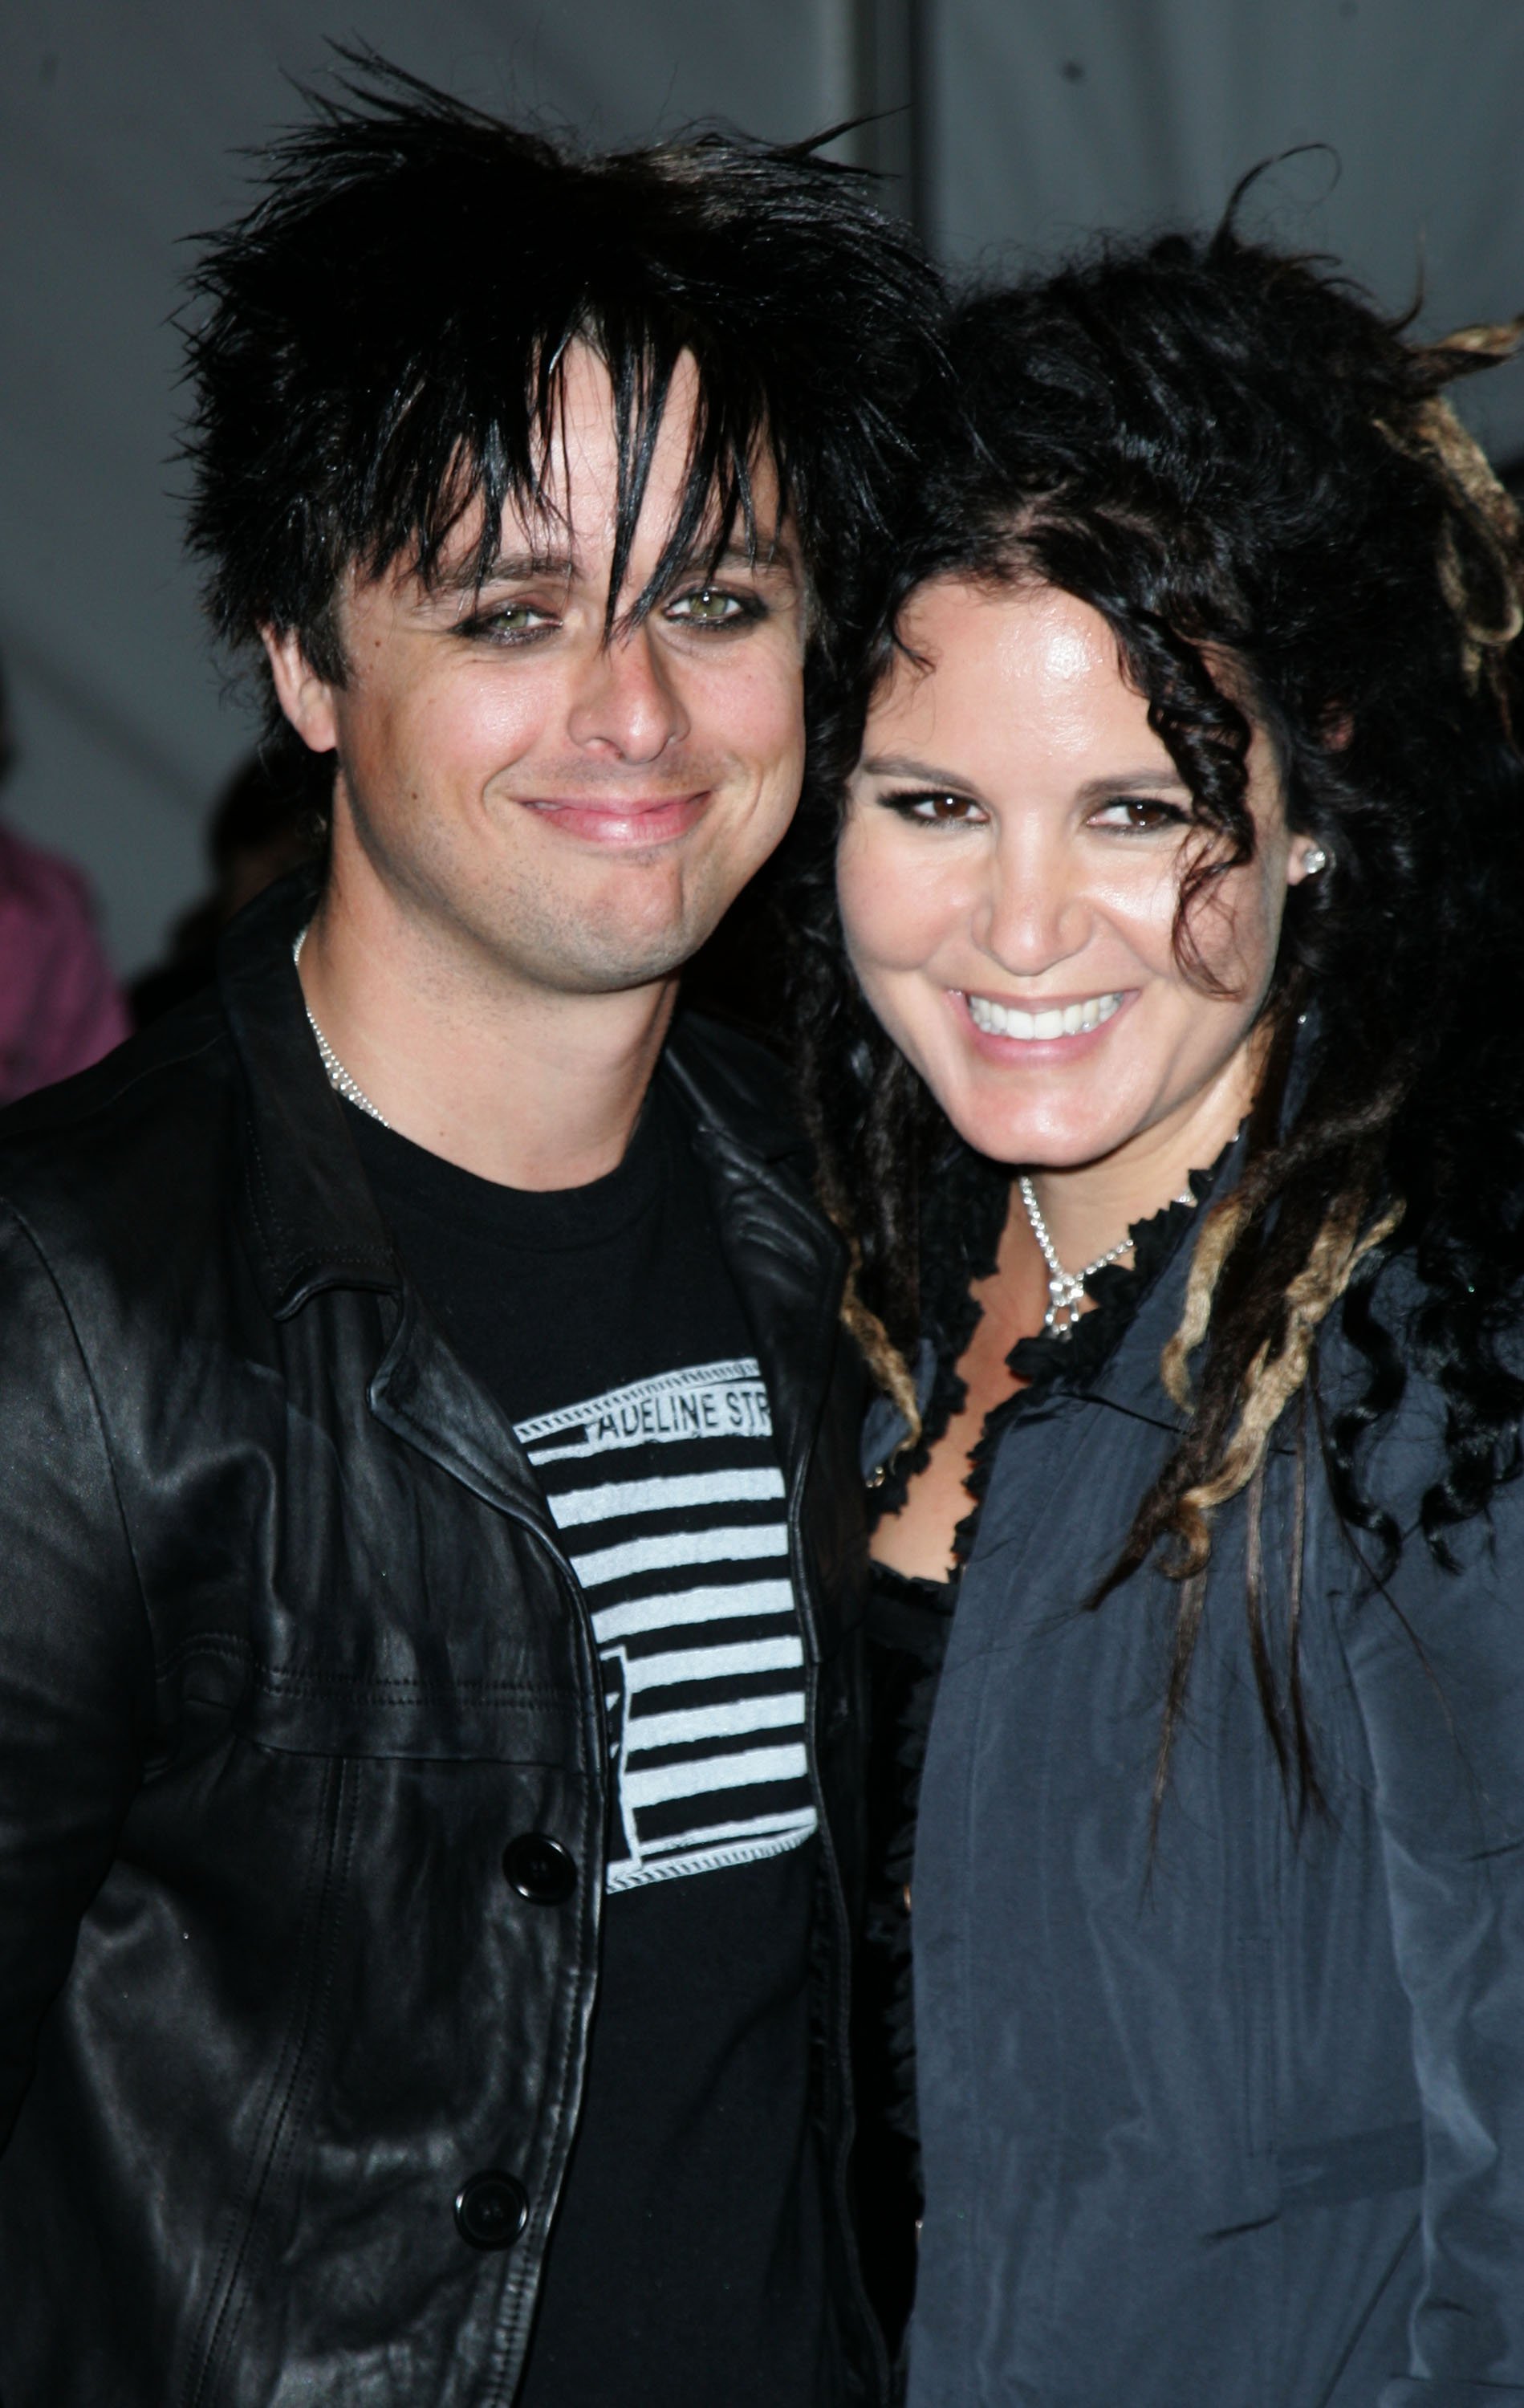 Billie Joe Armstrong and Adrienne Armstrong are pictured during AngloMania Costume Institute Gala at The Metropolitan Museum of Art on September 4, 2006, at Metropolitan Museum of Art in New York City. | Source: Getty Images